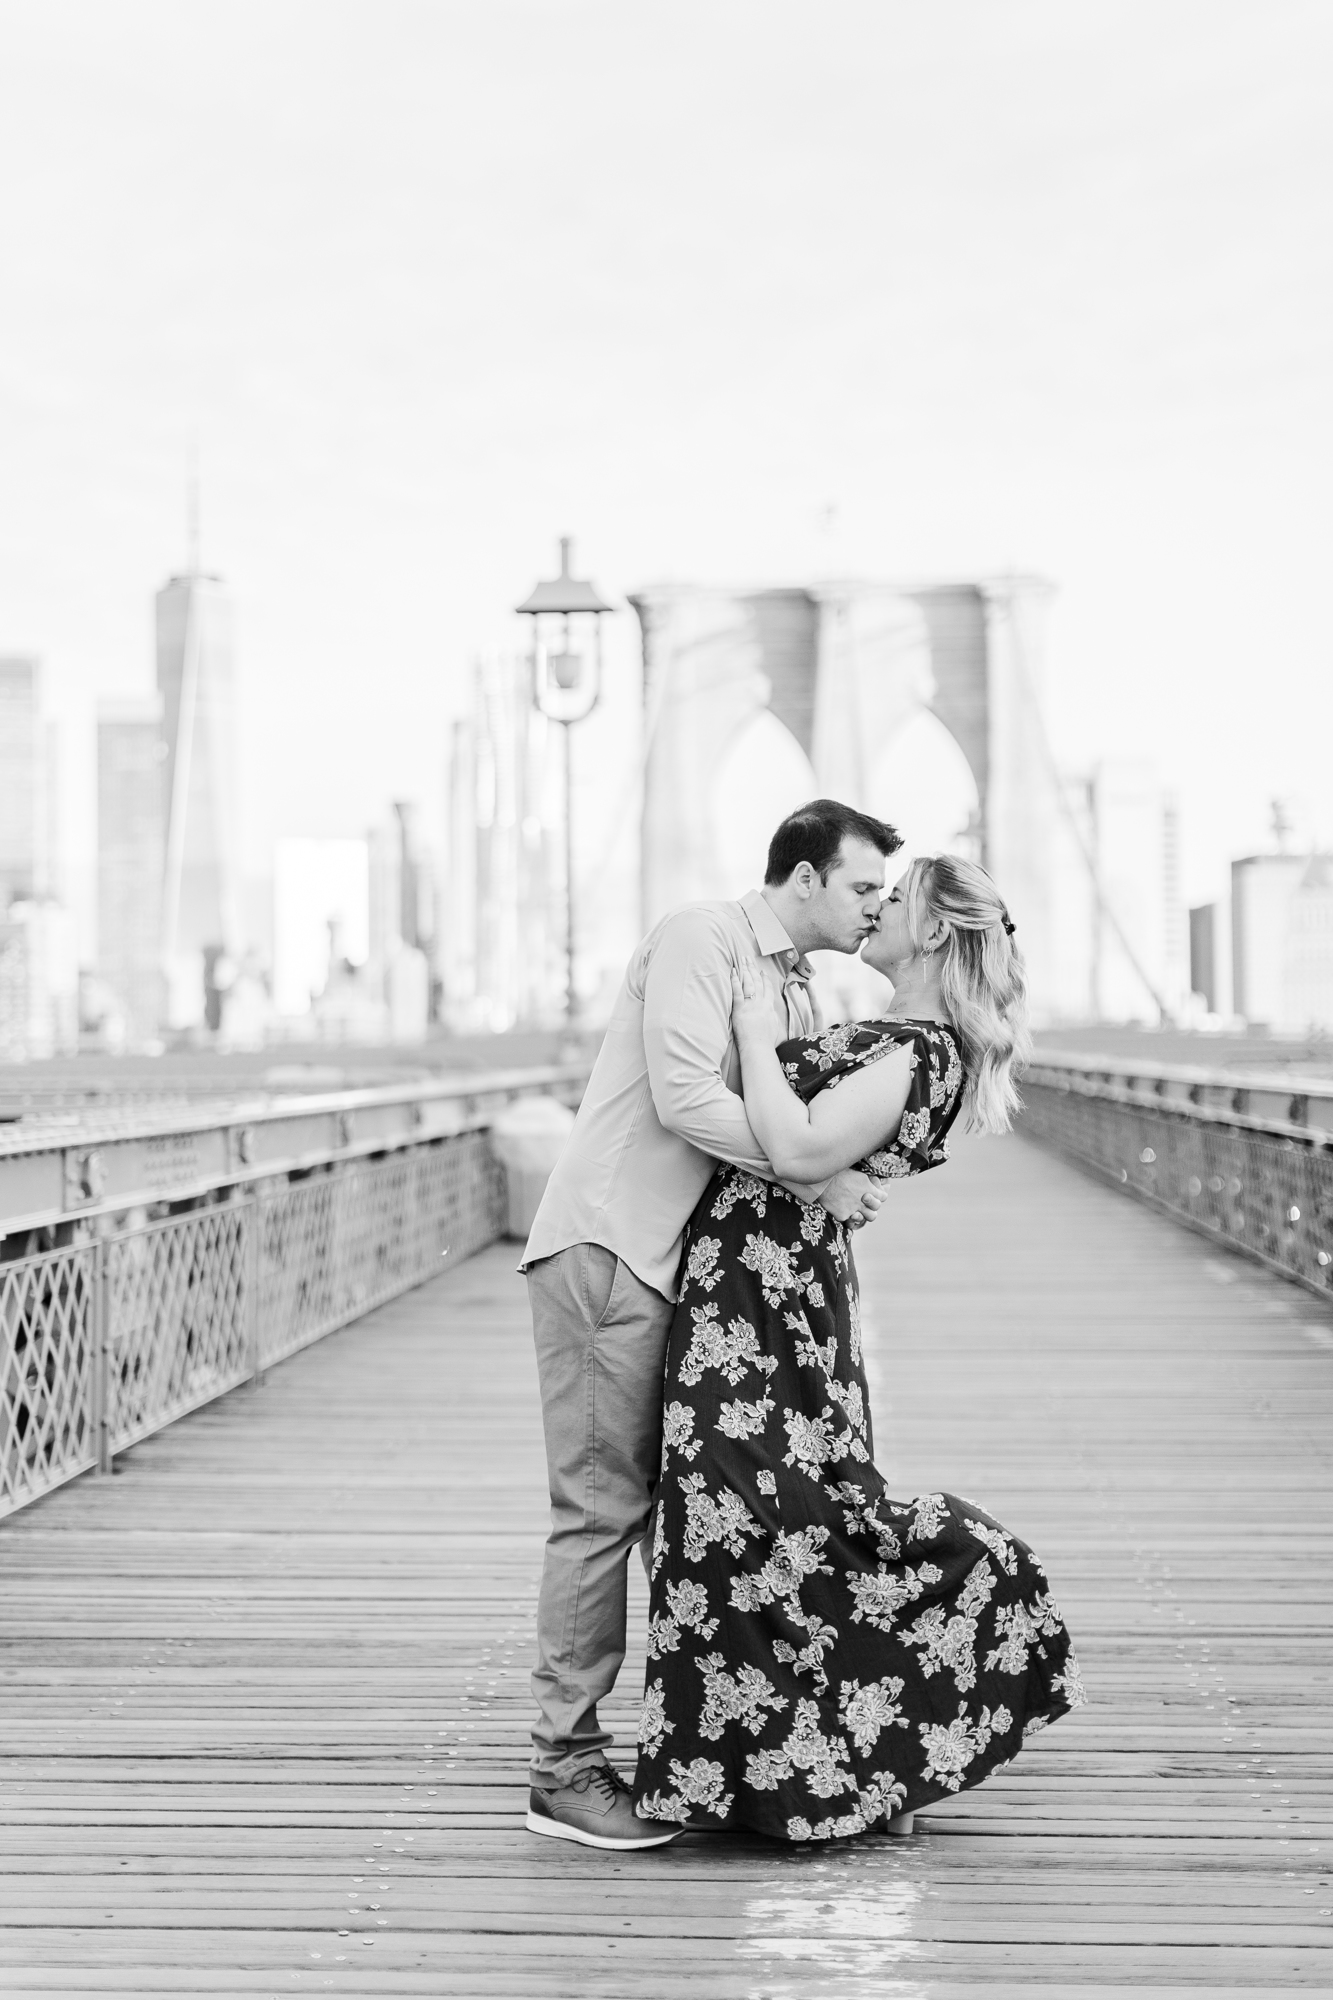 Playful Engagement Pictures in DUMBO